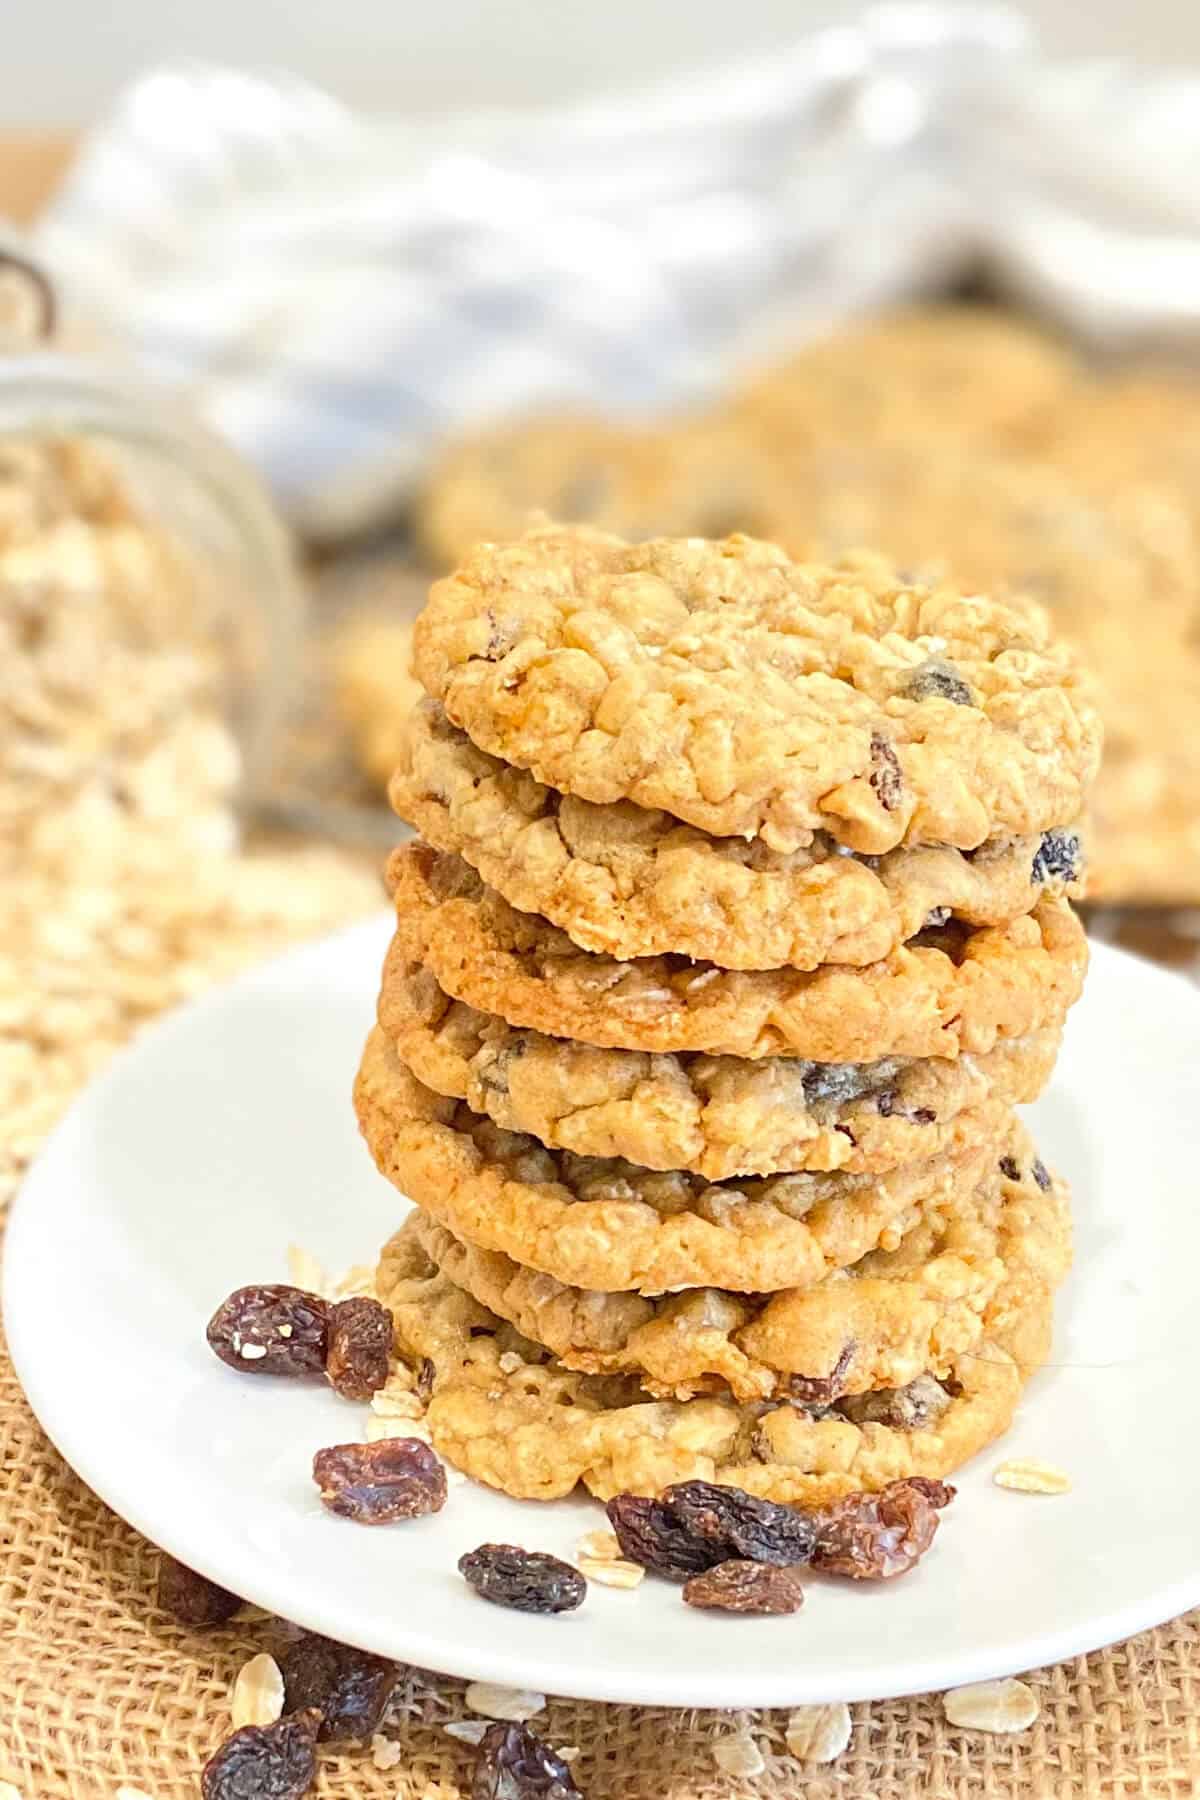 Cookies stacked on a white plate.